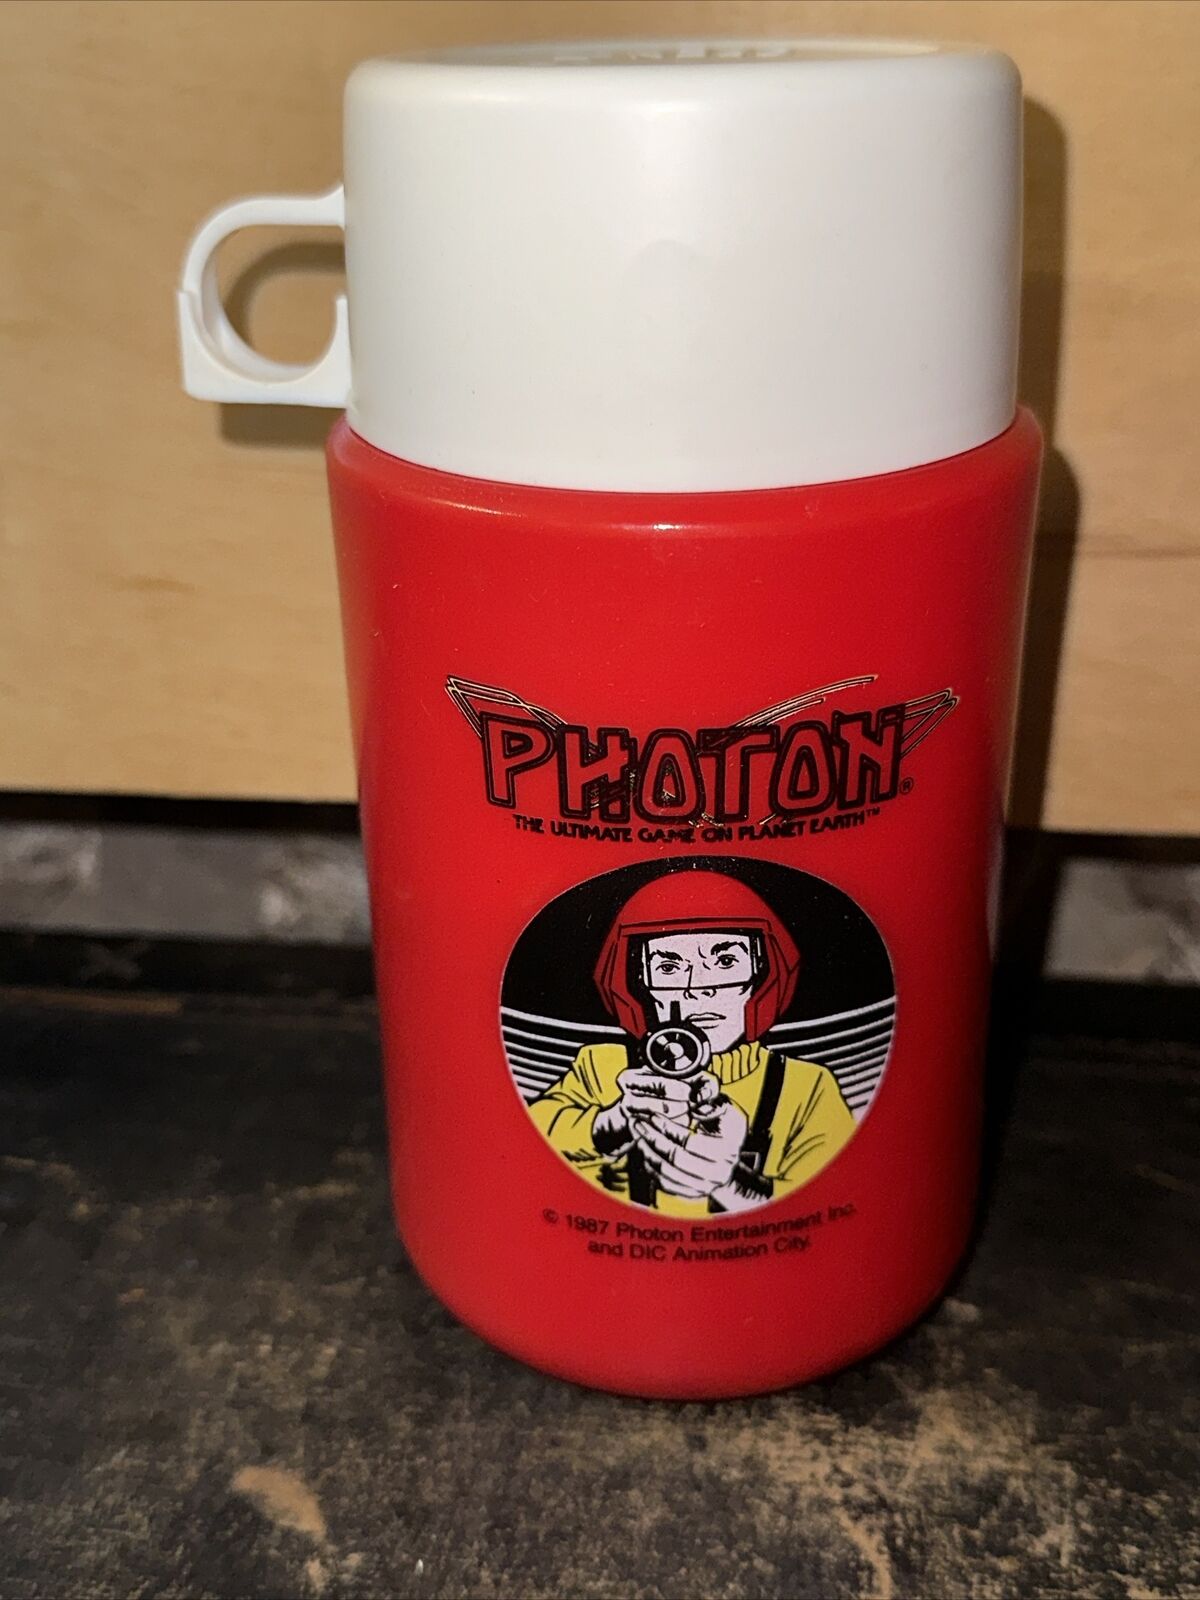 1987 Photon lunch Box Thermos vintage rare collectable decor New Old Stock